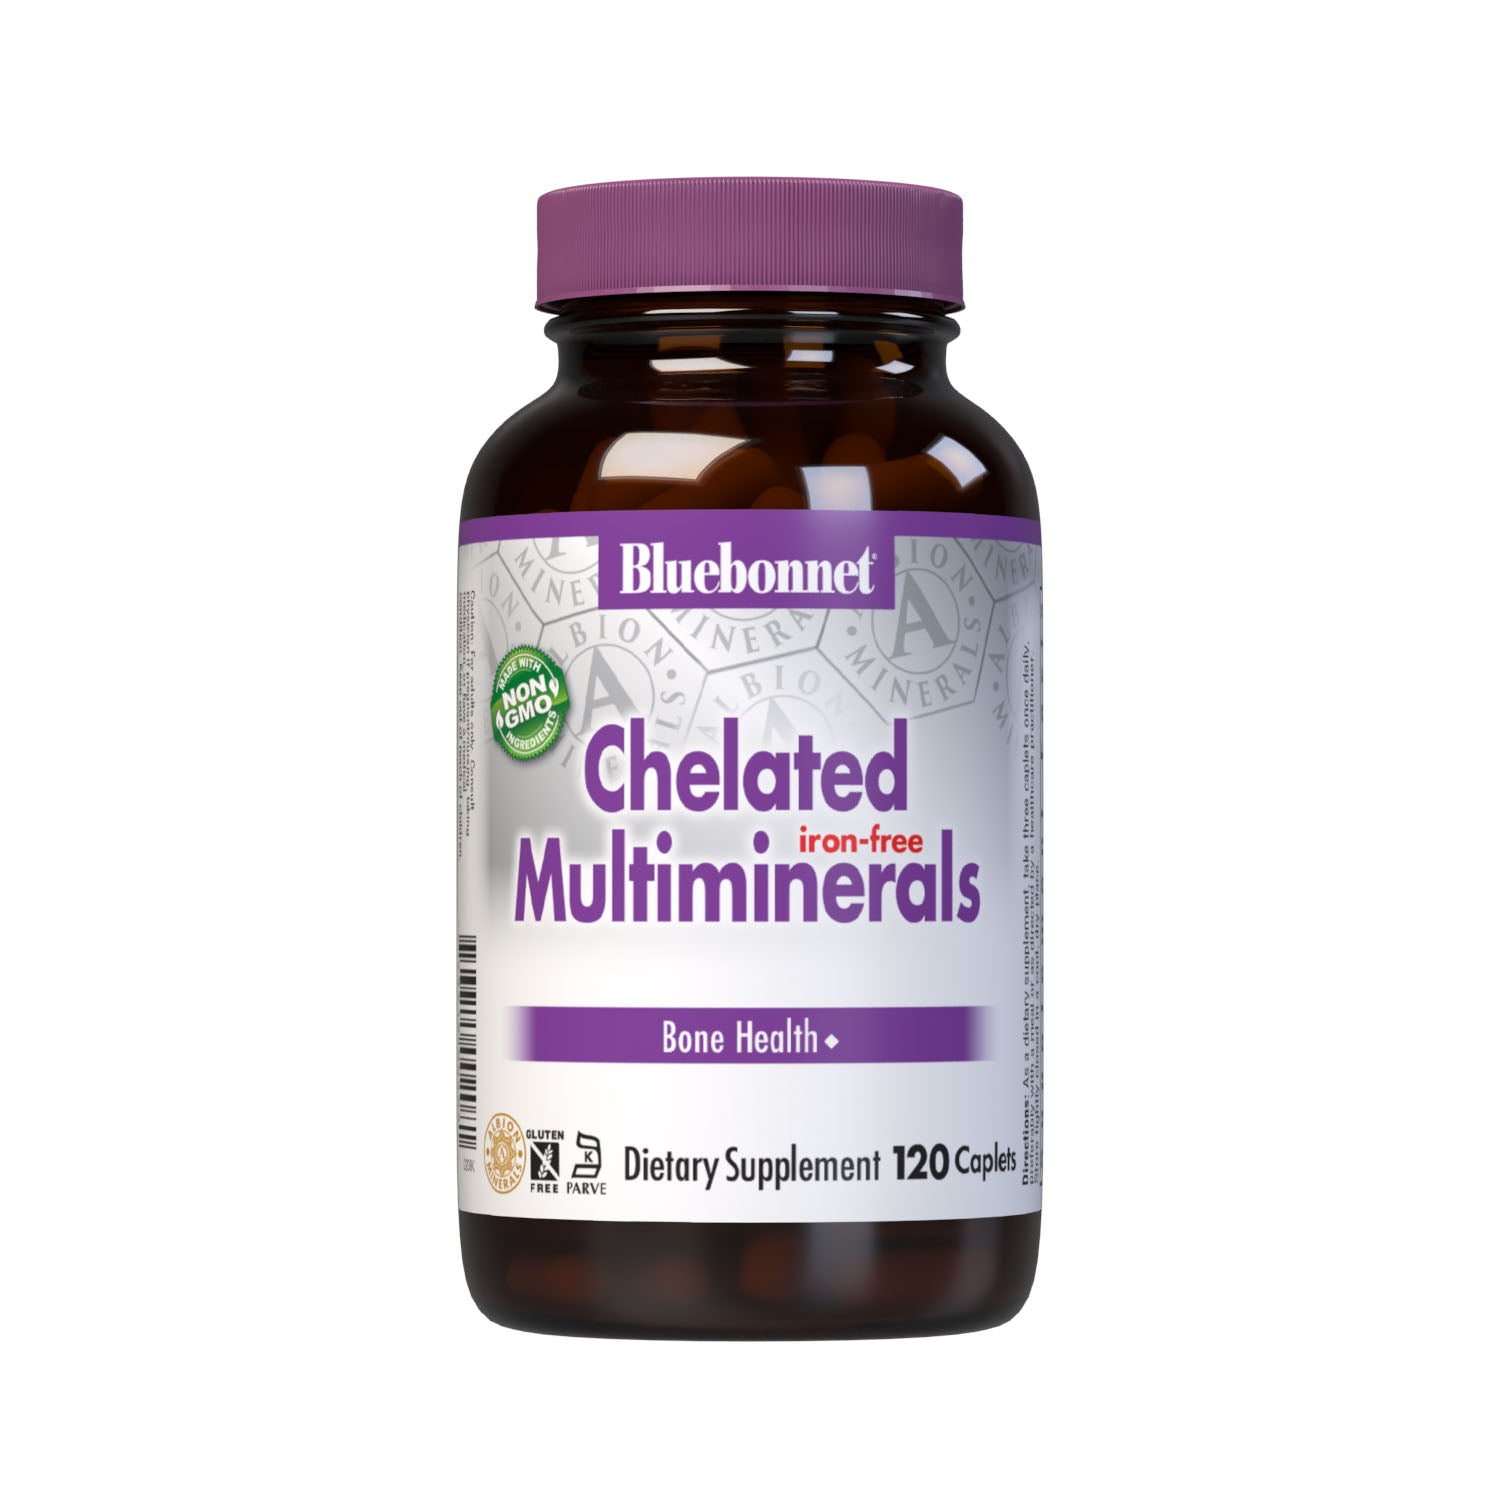 Bluebonnet’s Albion Chelated Multiminerals 120 Caplets (Iron-Free) are formulated with a fully reacted amino acid chelate multimineral supplement formulated with iron and advanced chelating agents, including: malates, citrates and glycinates. #size_120 count